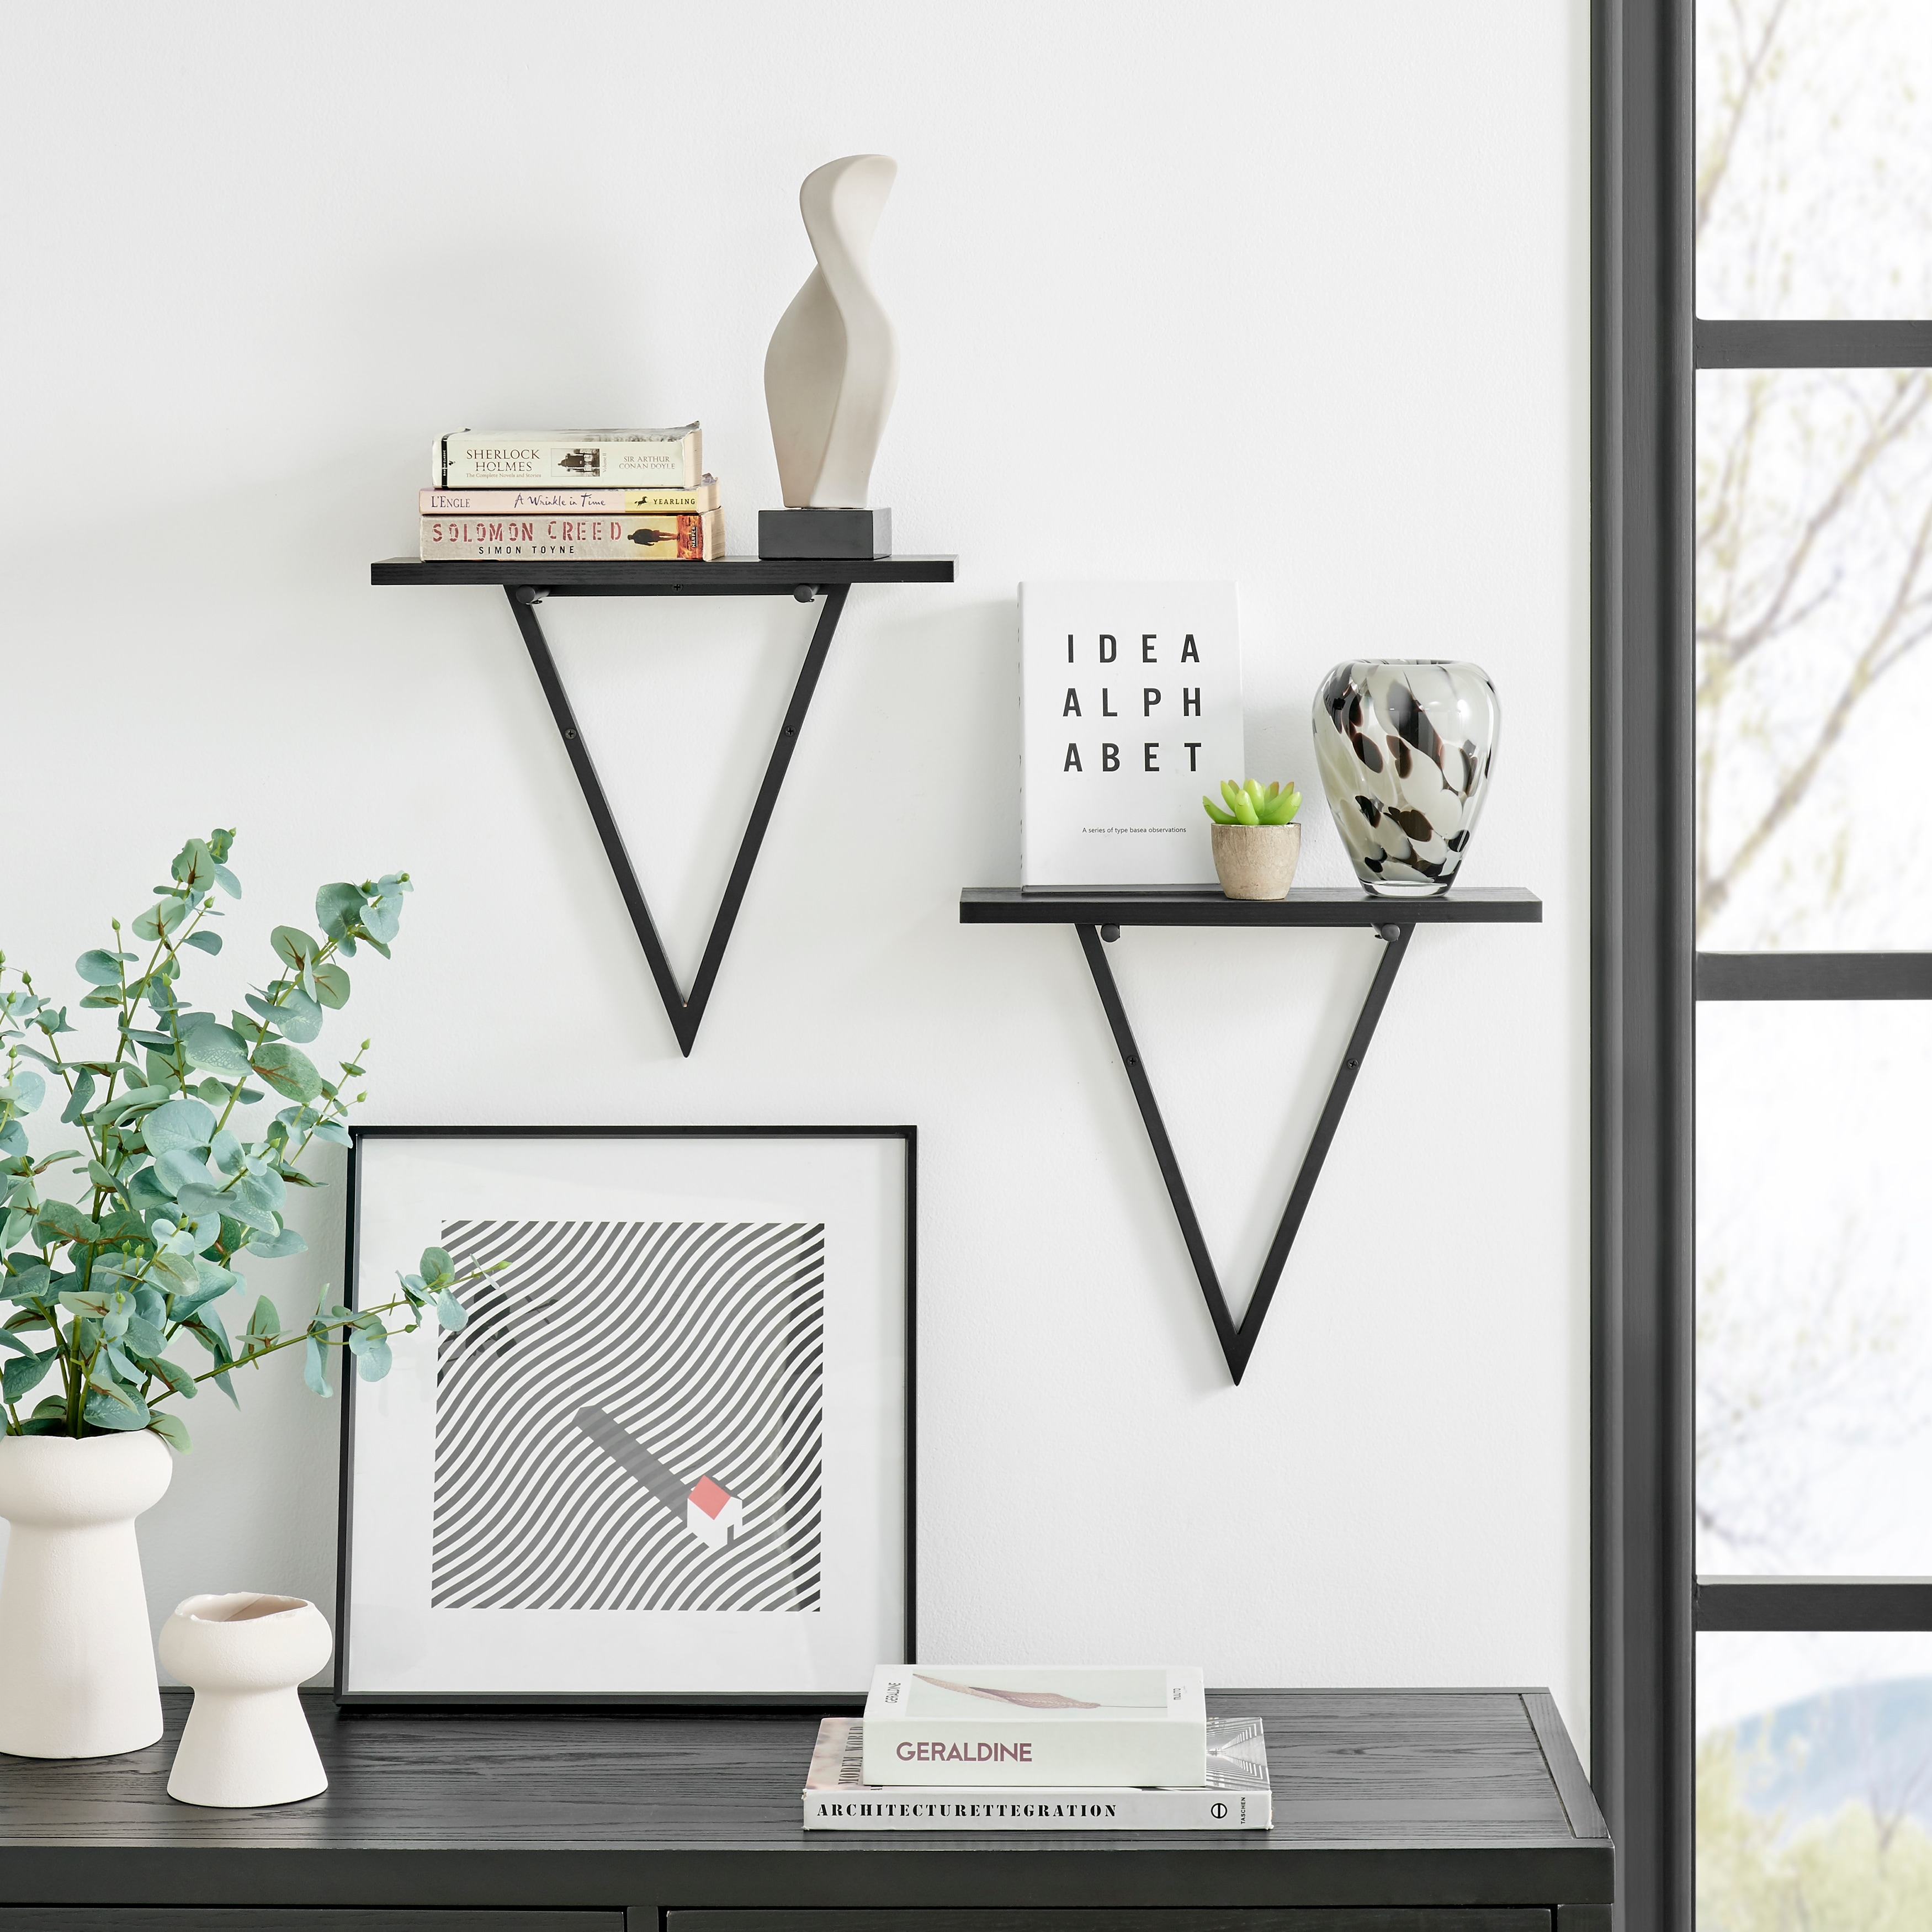 https://ak1.ostkcdn.com/images/products/is/images/direct/7b03b604e8d5faa59cf1d6fca5df70b6ce38aa48/Danya-B.-Contemporary-Decorative-Triangle-Accent-Wall-Shelf---Reversible-Configuration.jpg